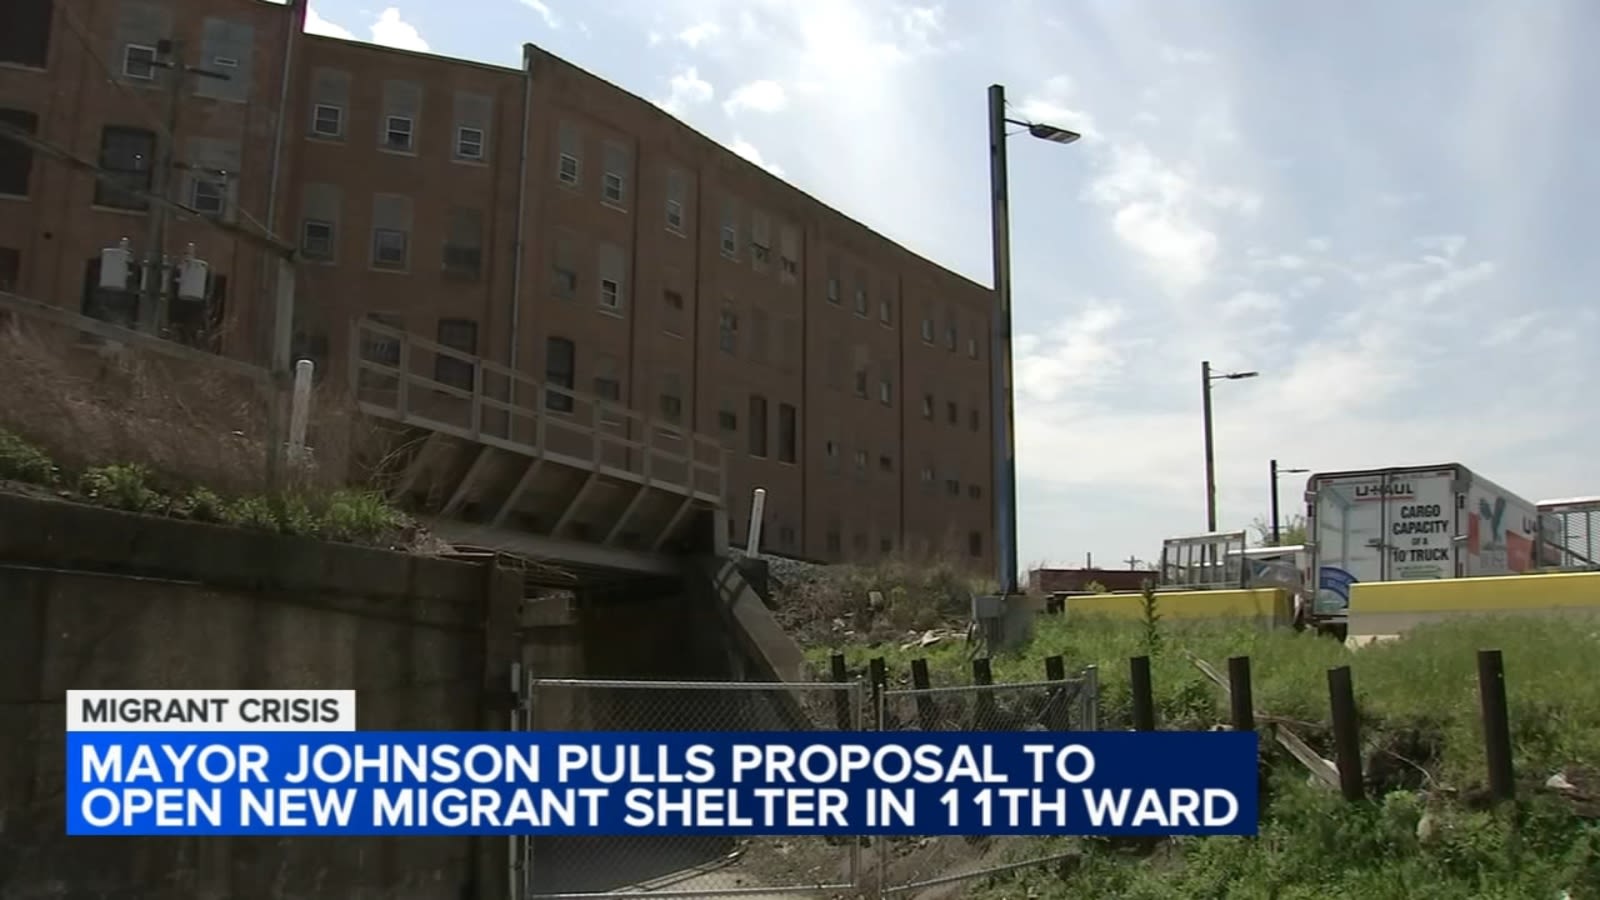 Mayor Johnson pulling proposal to open new Chicago migrant shelter on South Side